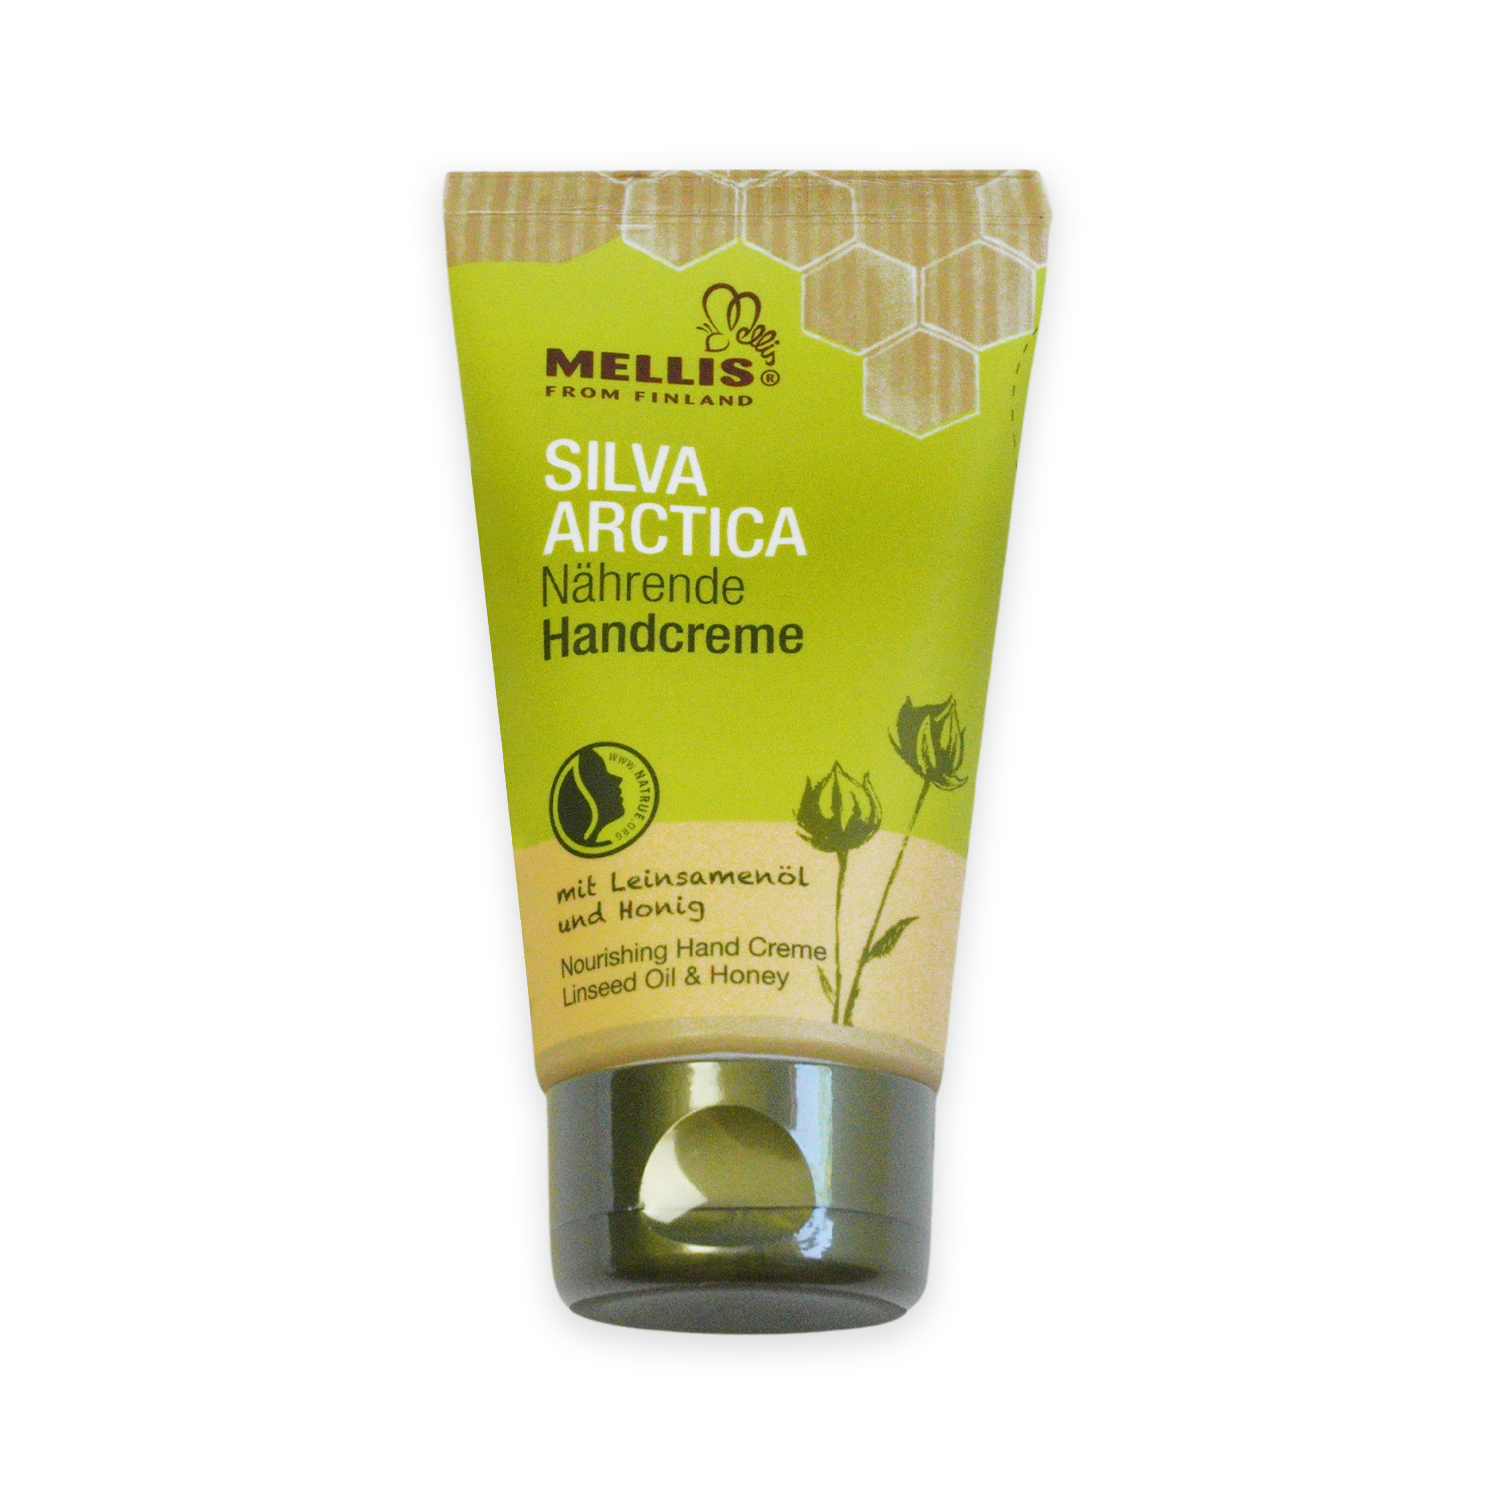 Laboratorium Portaal Initiatief Silva Arctica Hand Creme with Linseed Oil & Honey – Touch of Finland